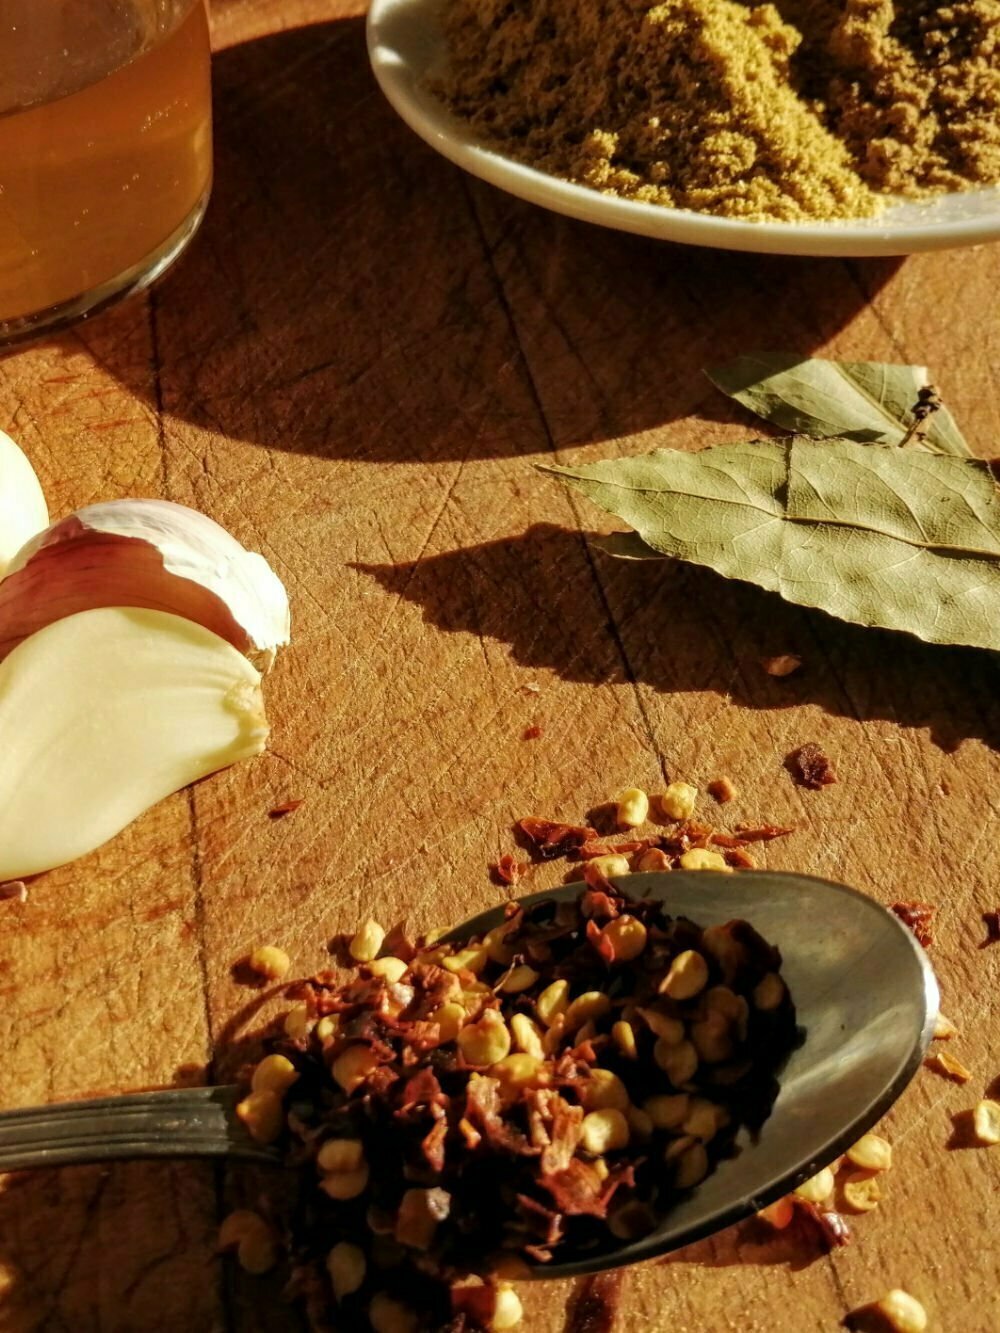 A rustic choppig board sits loaded with ingredients for making spinach with chickpeas, including dried chili flakes, bay leaves, garlic, and grund corriander